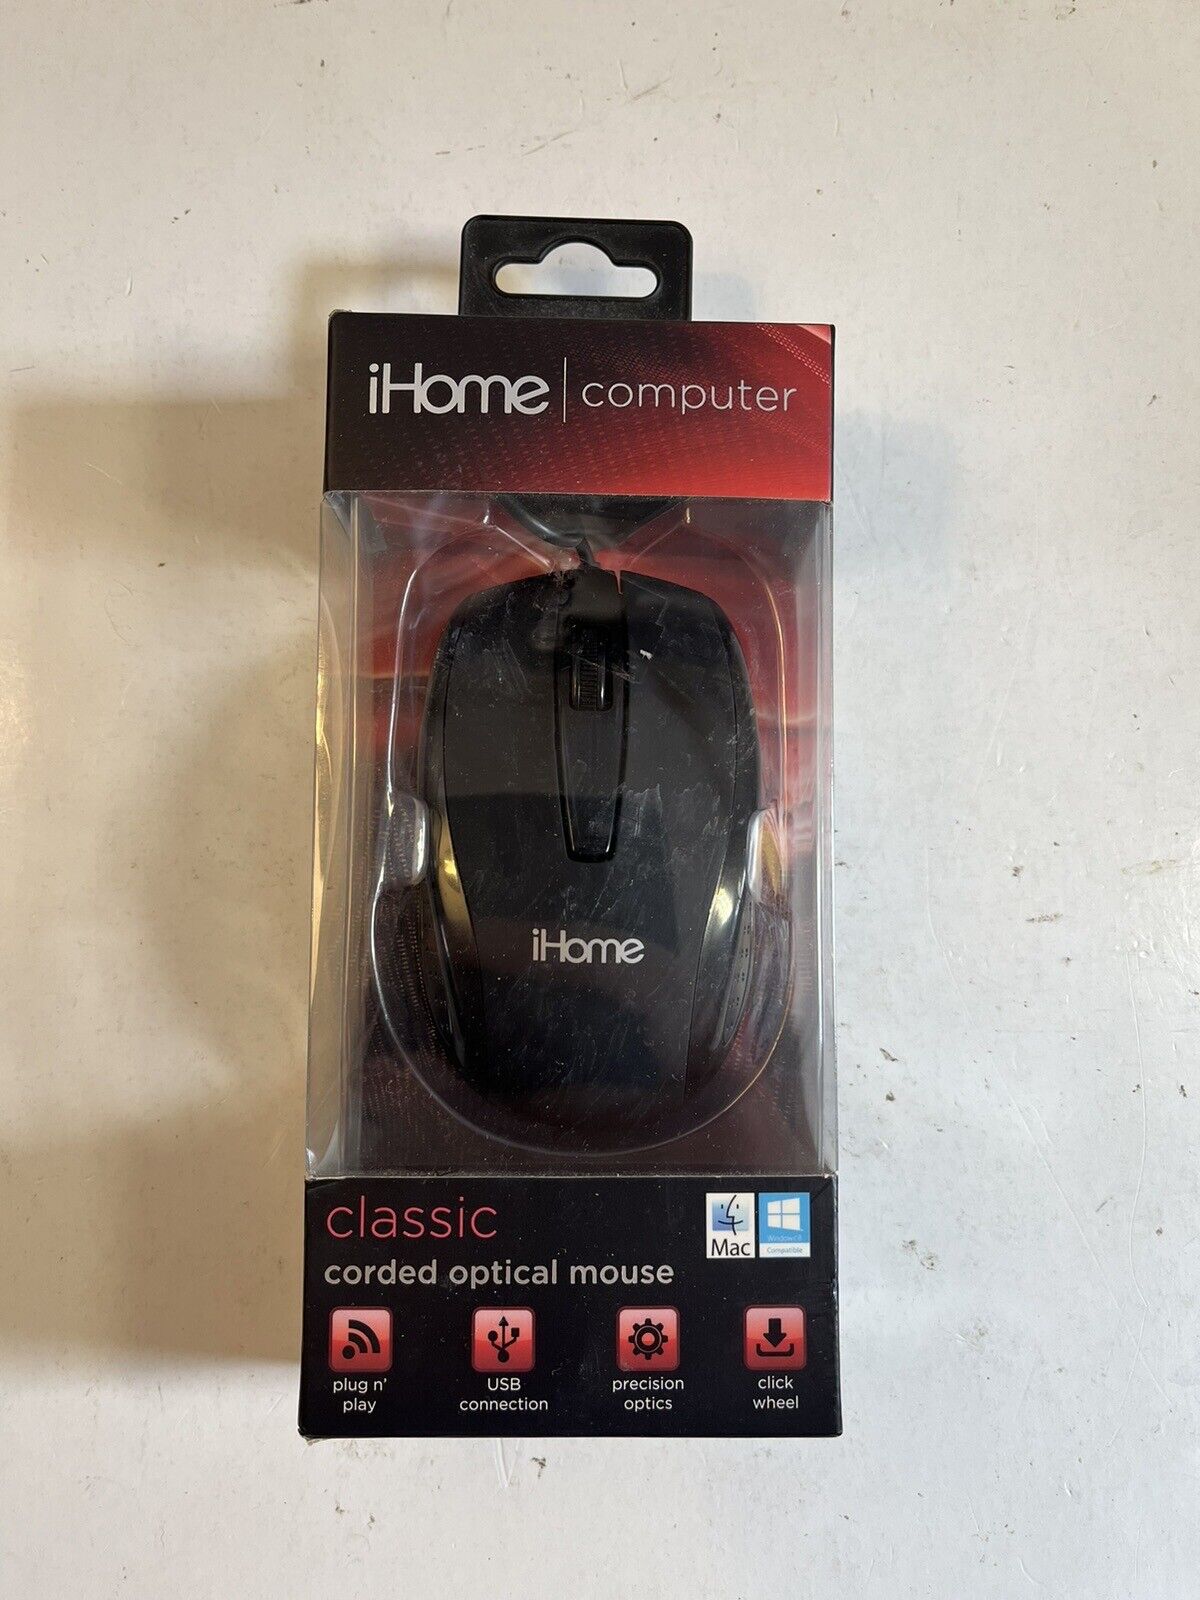 New iHome Computer Classic USB Corded Optical Mouse Black IH-M600B for Mac/PC